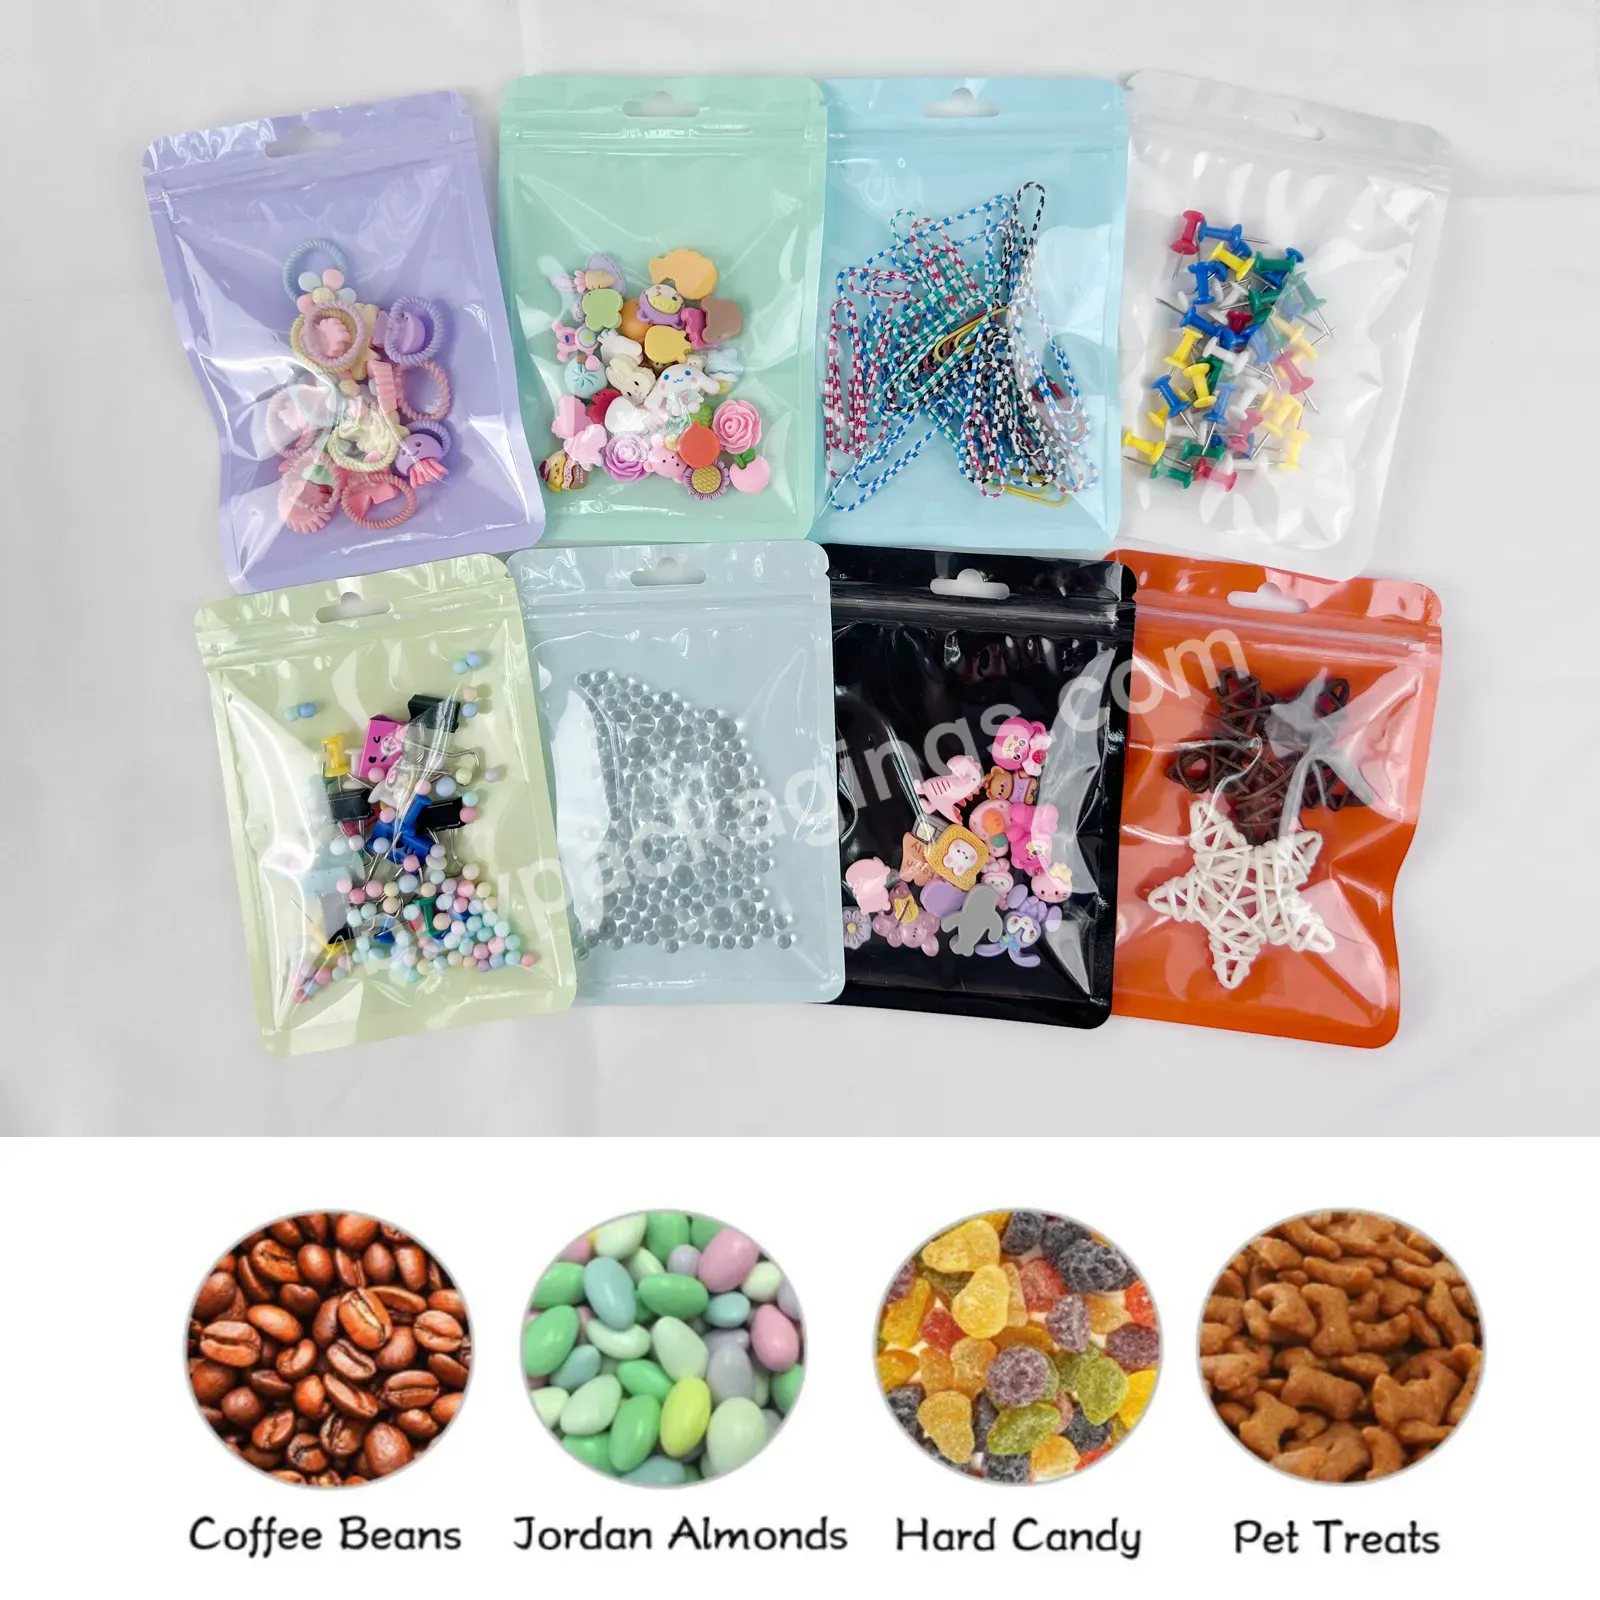 Share Plastic Bag With Zip Lock Bags Black Green White Blue Color Packing Bag With Zipper